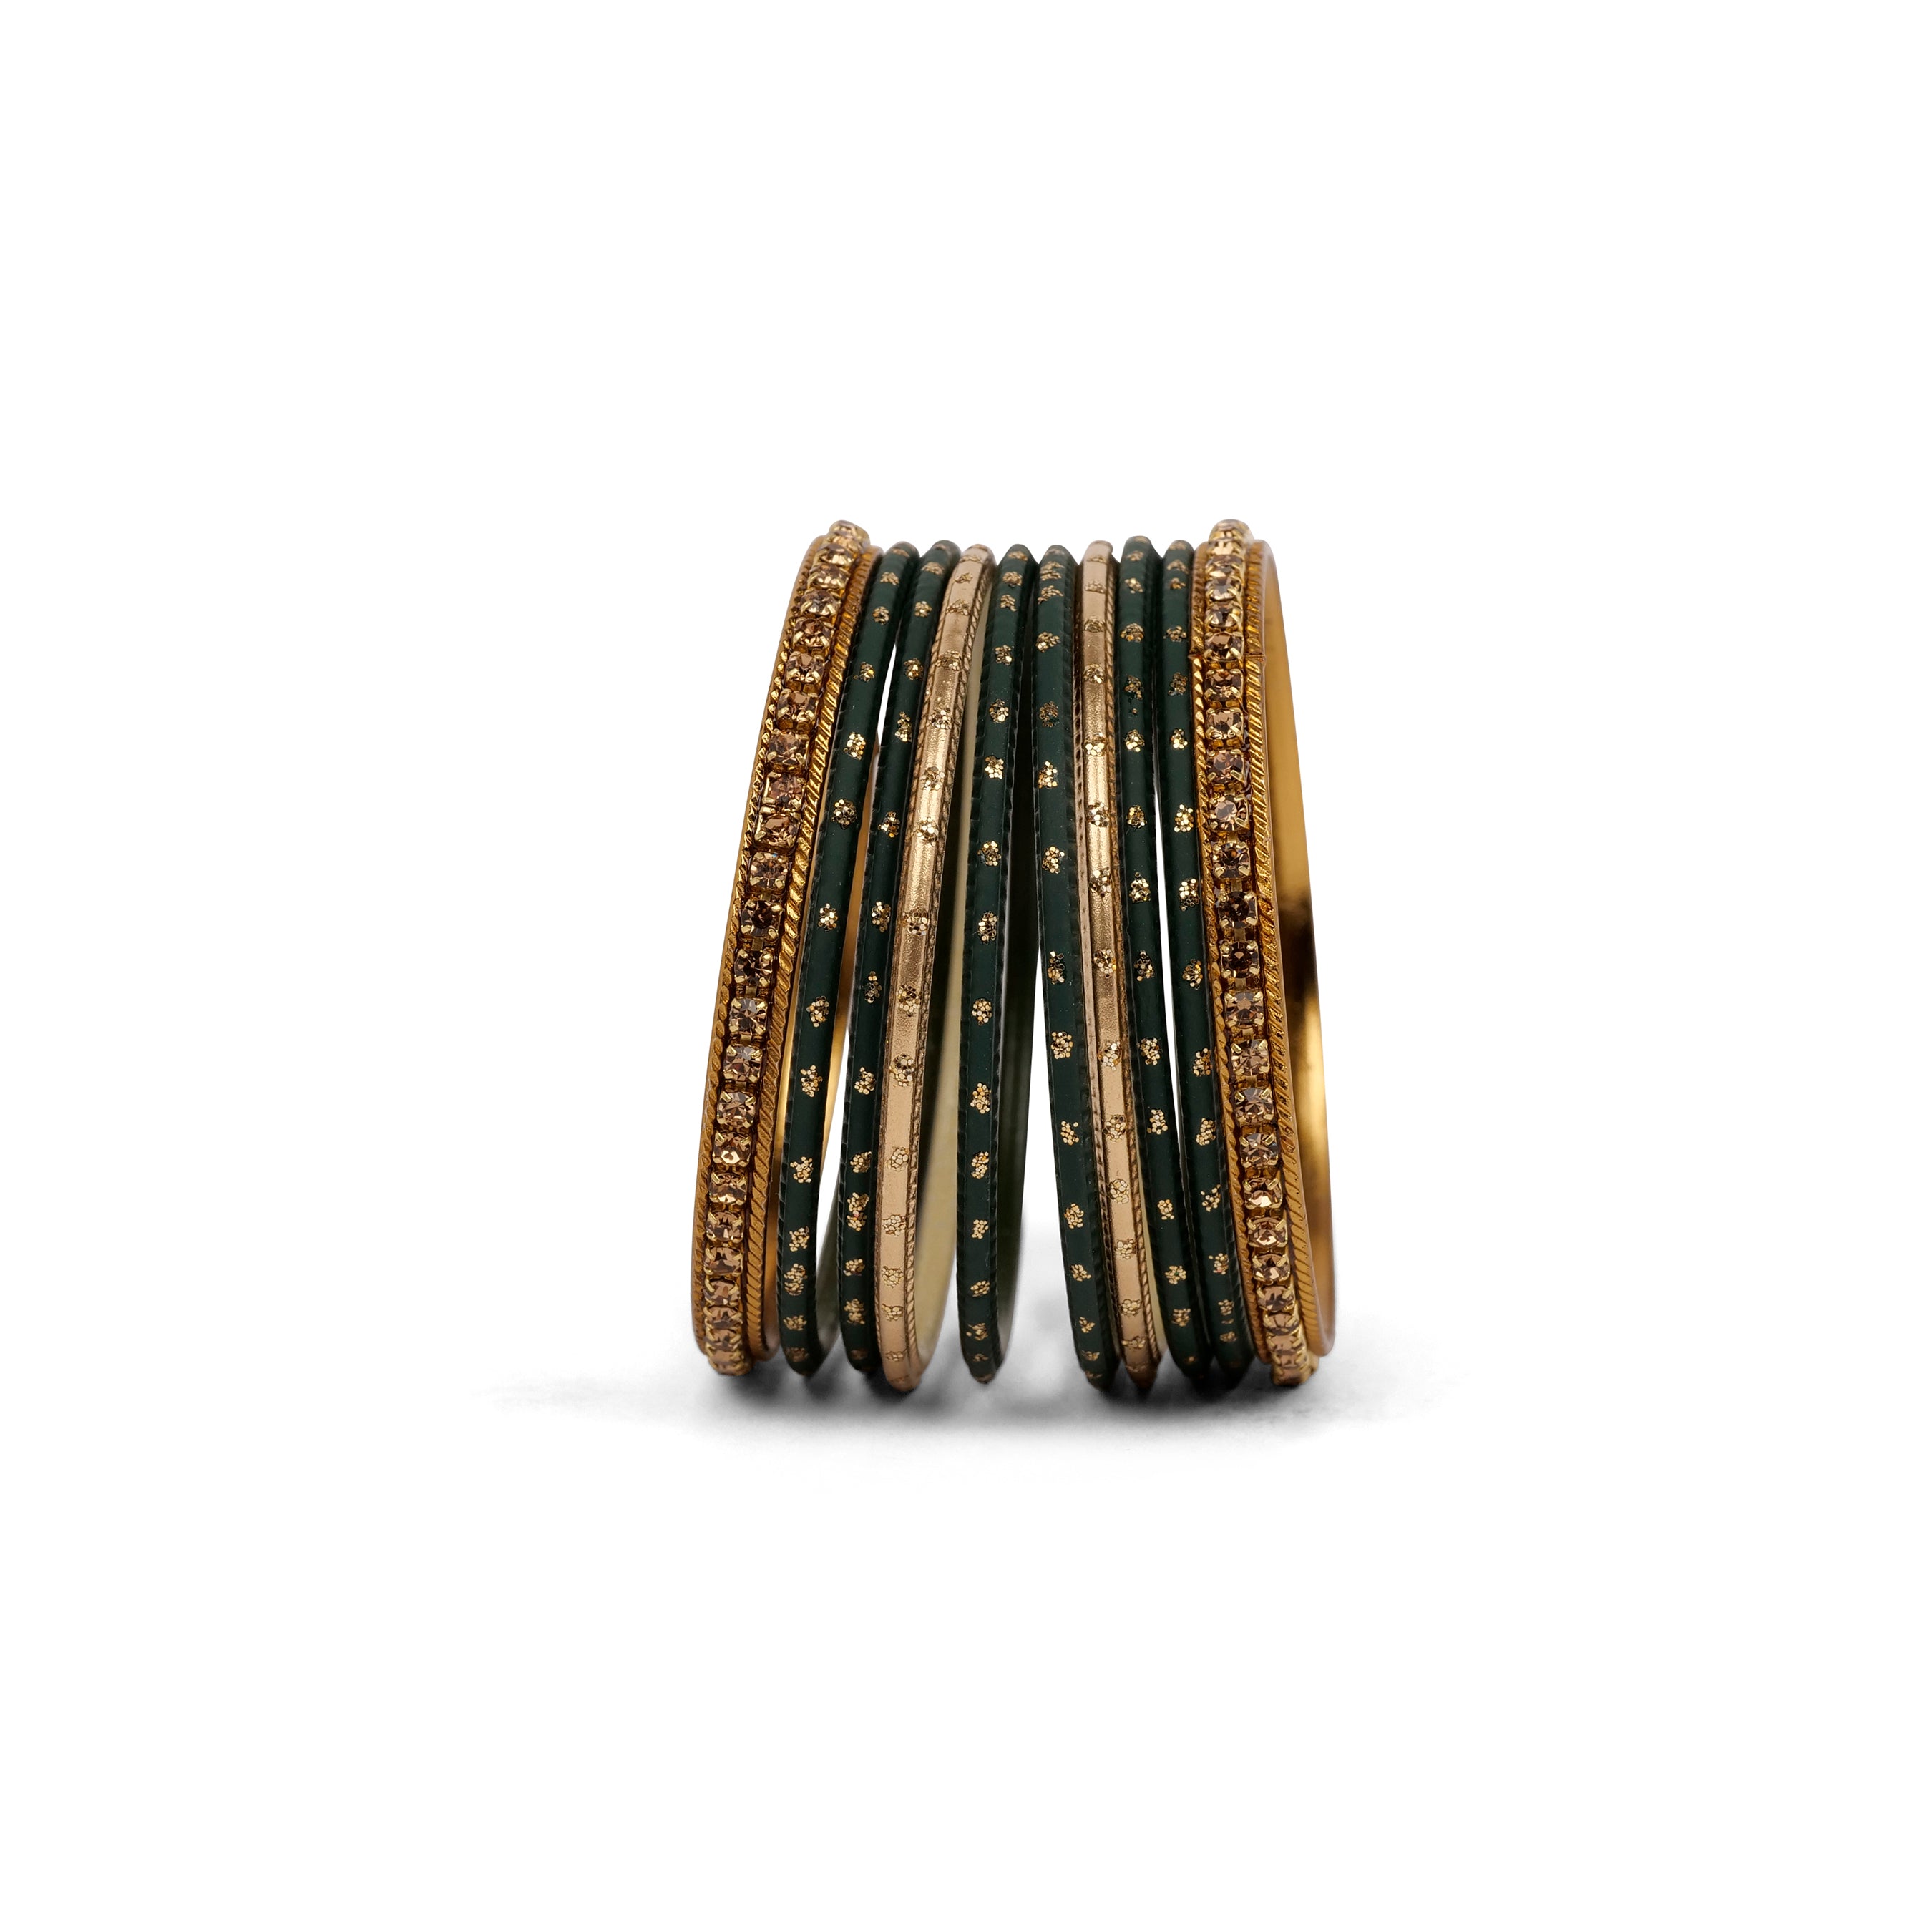 Children's Bangle Set in Green and Antique Gold